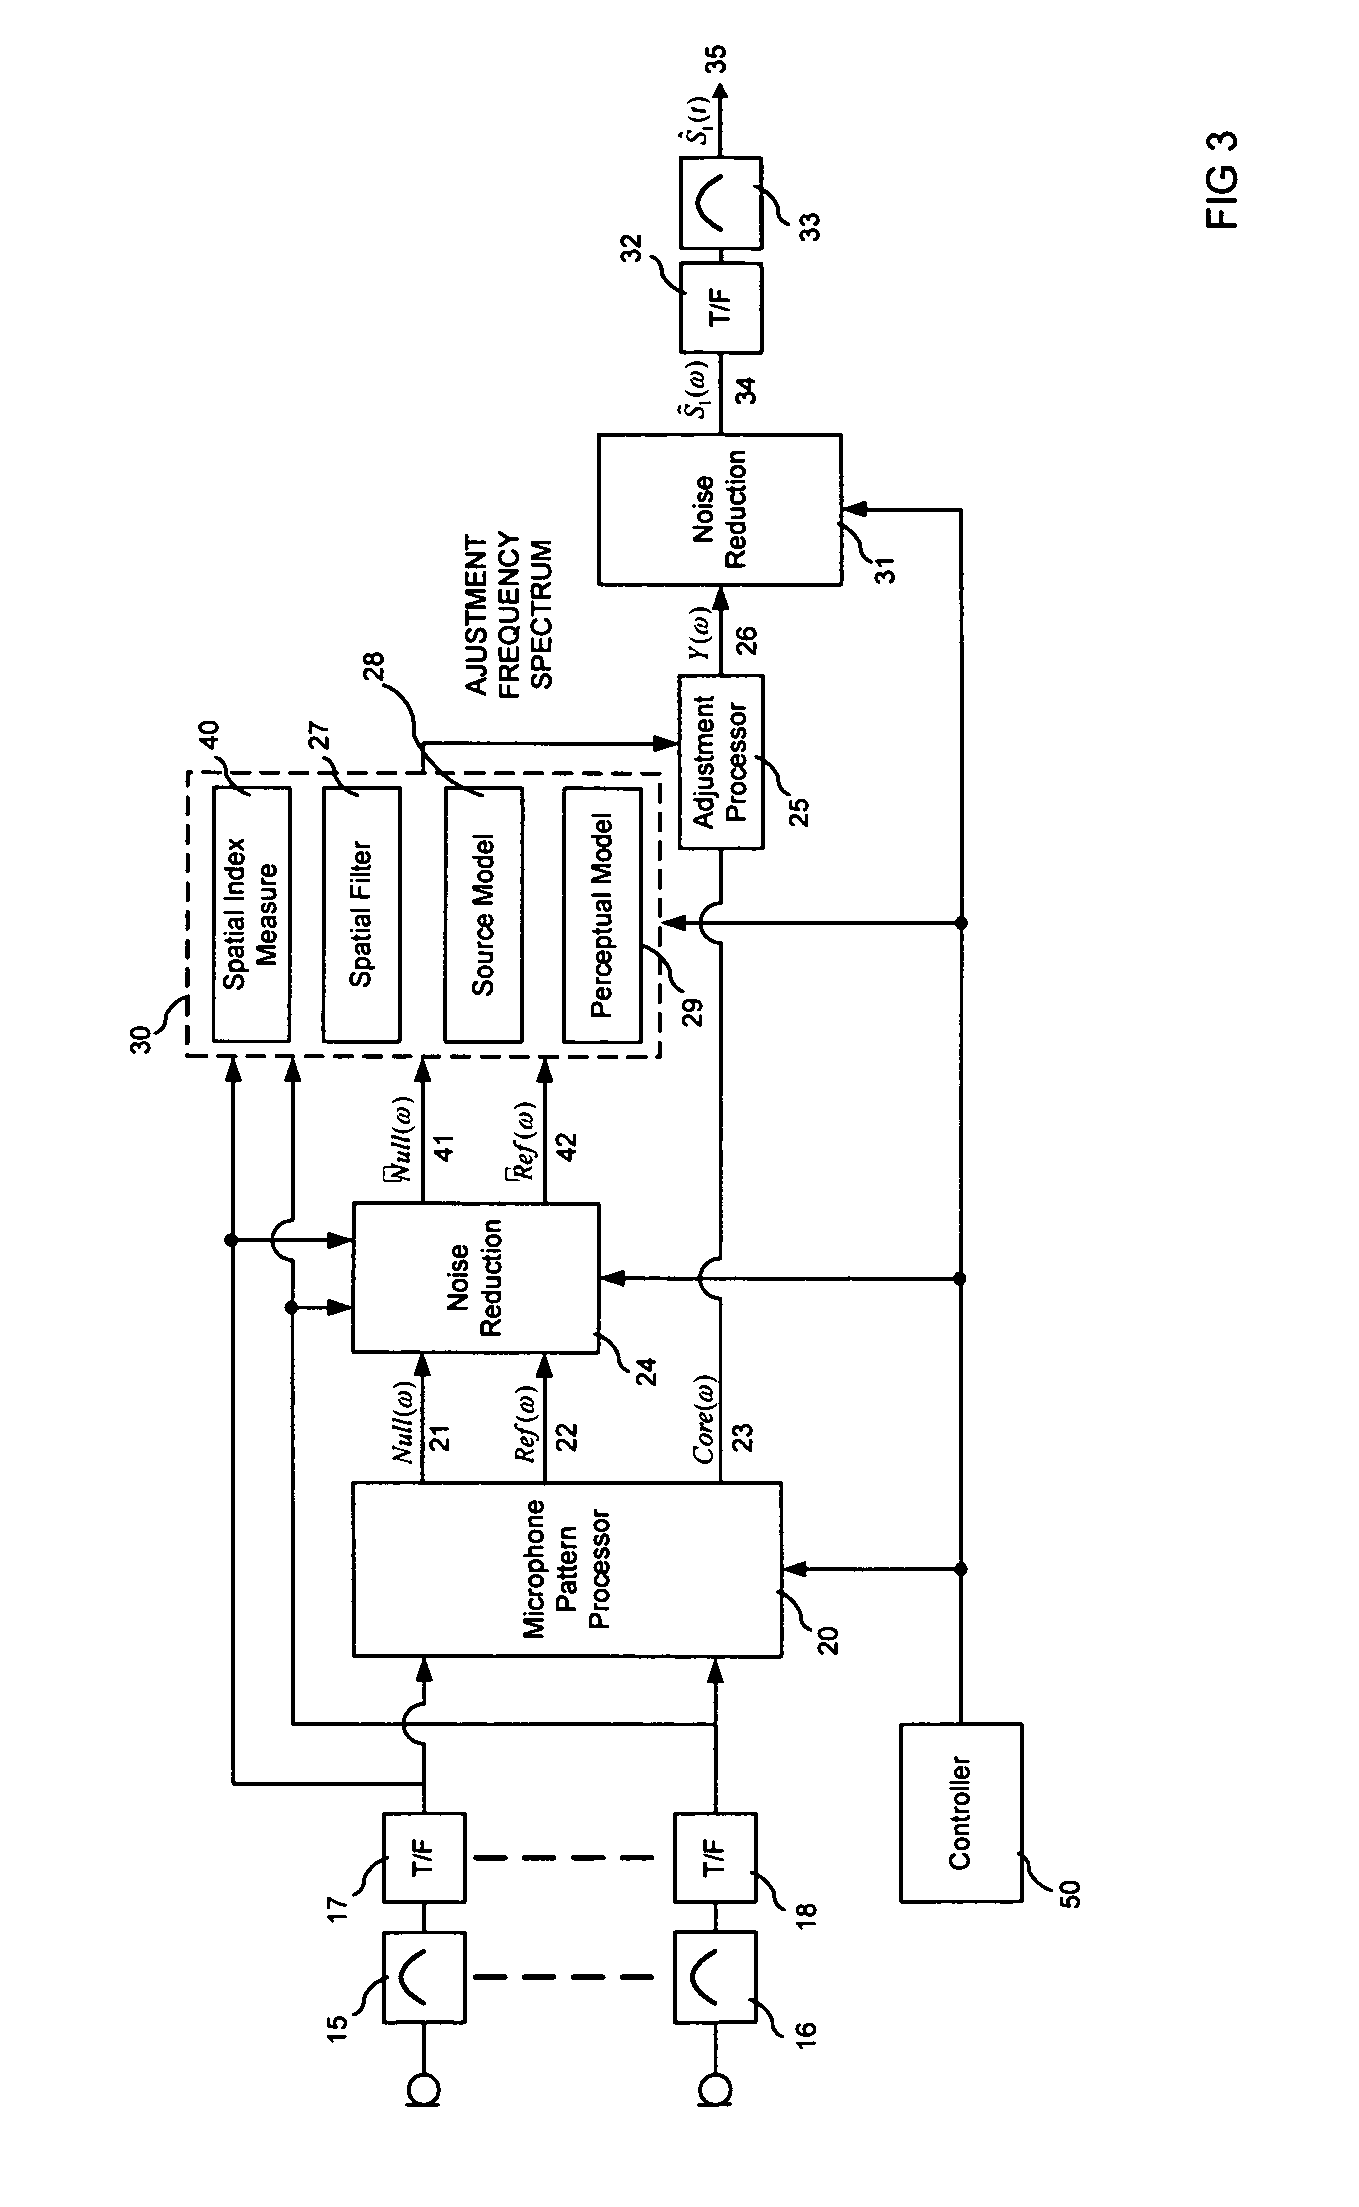 Method and apparatus for selectively extracting components of an input signal